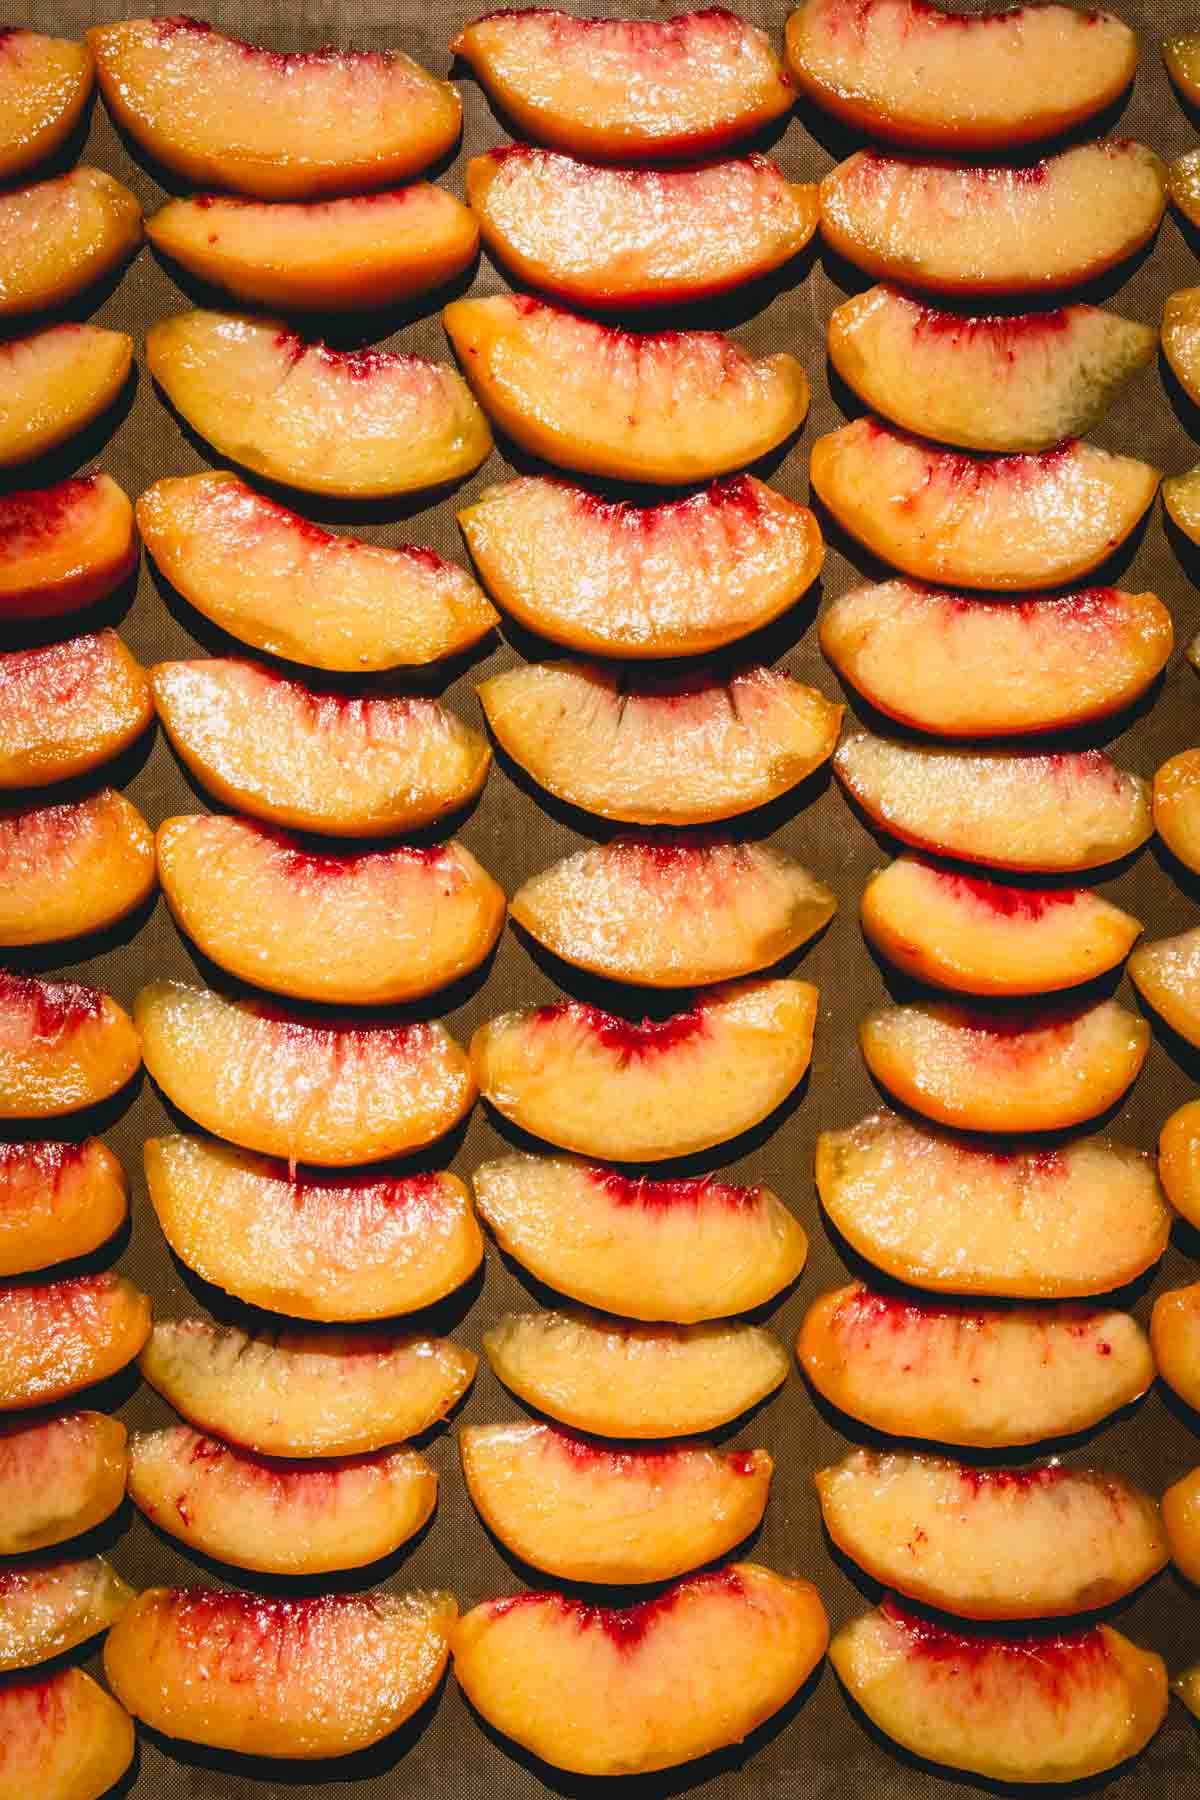 Rows of peach slices on a baking sheet.